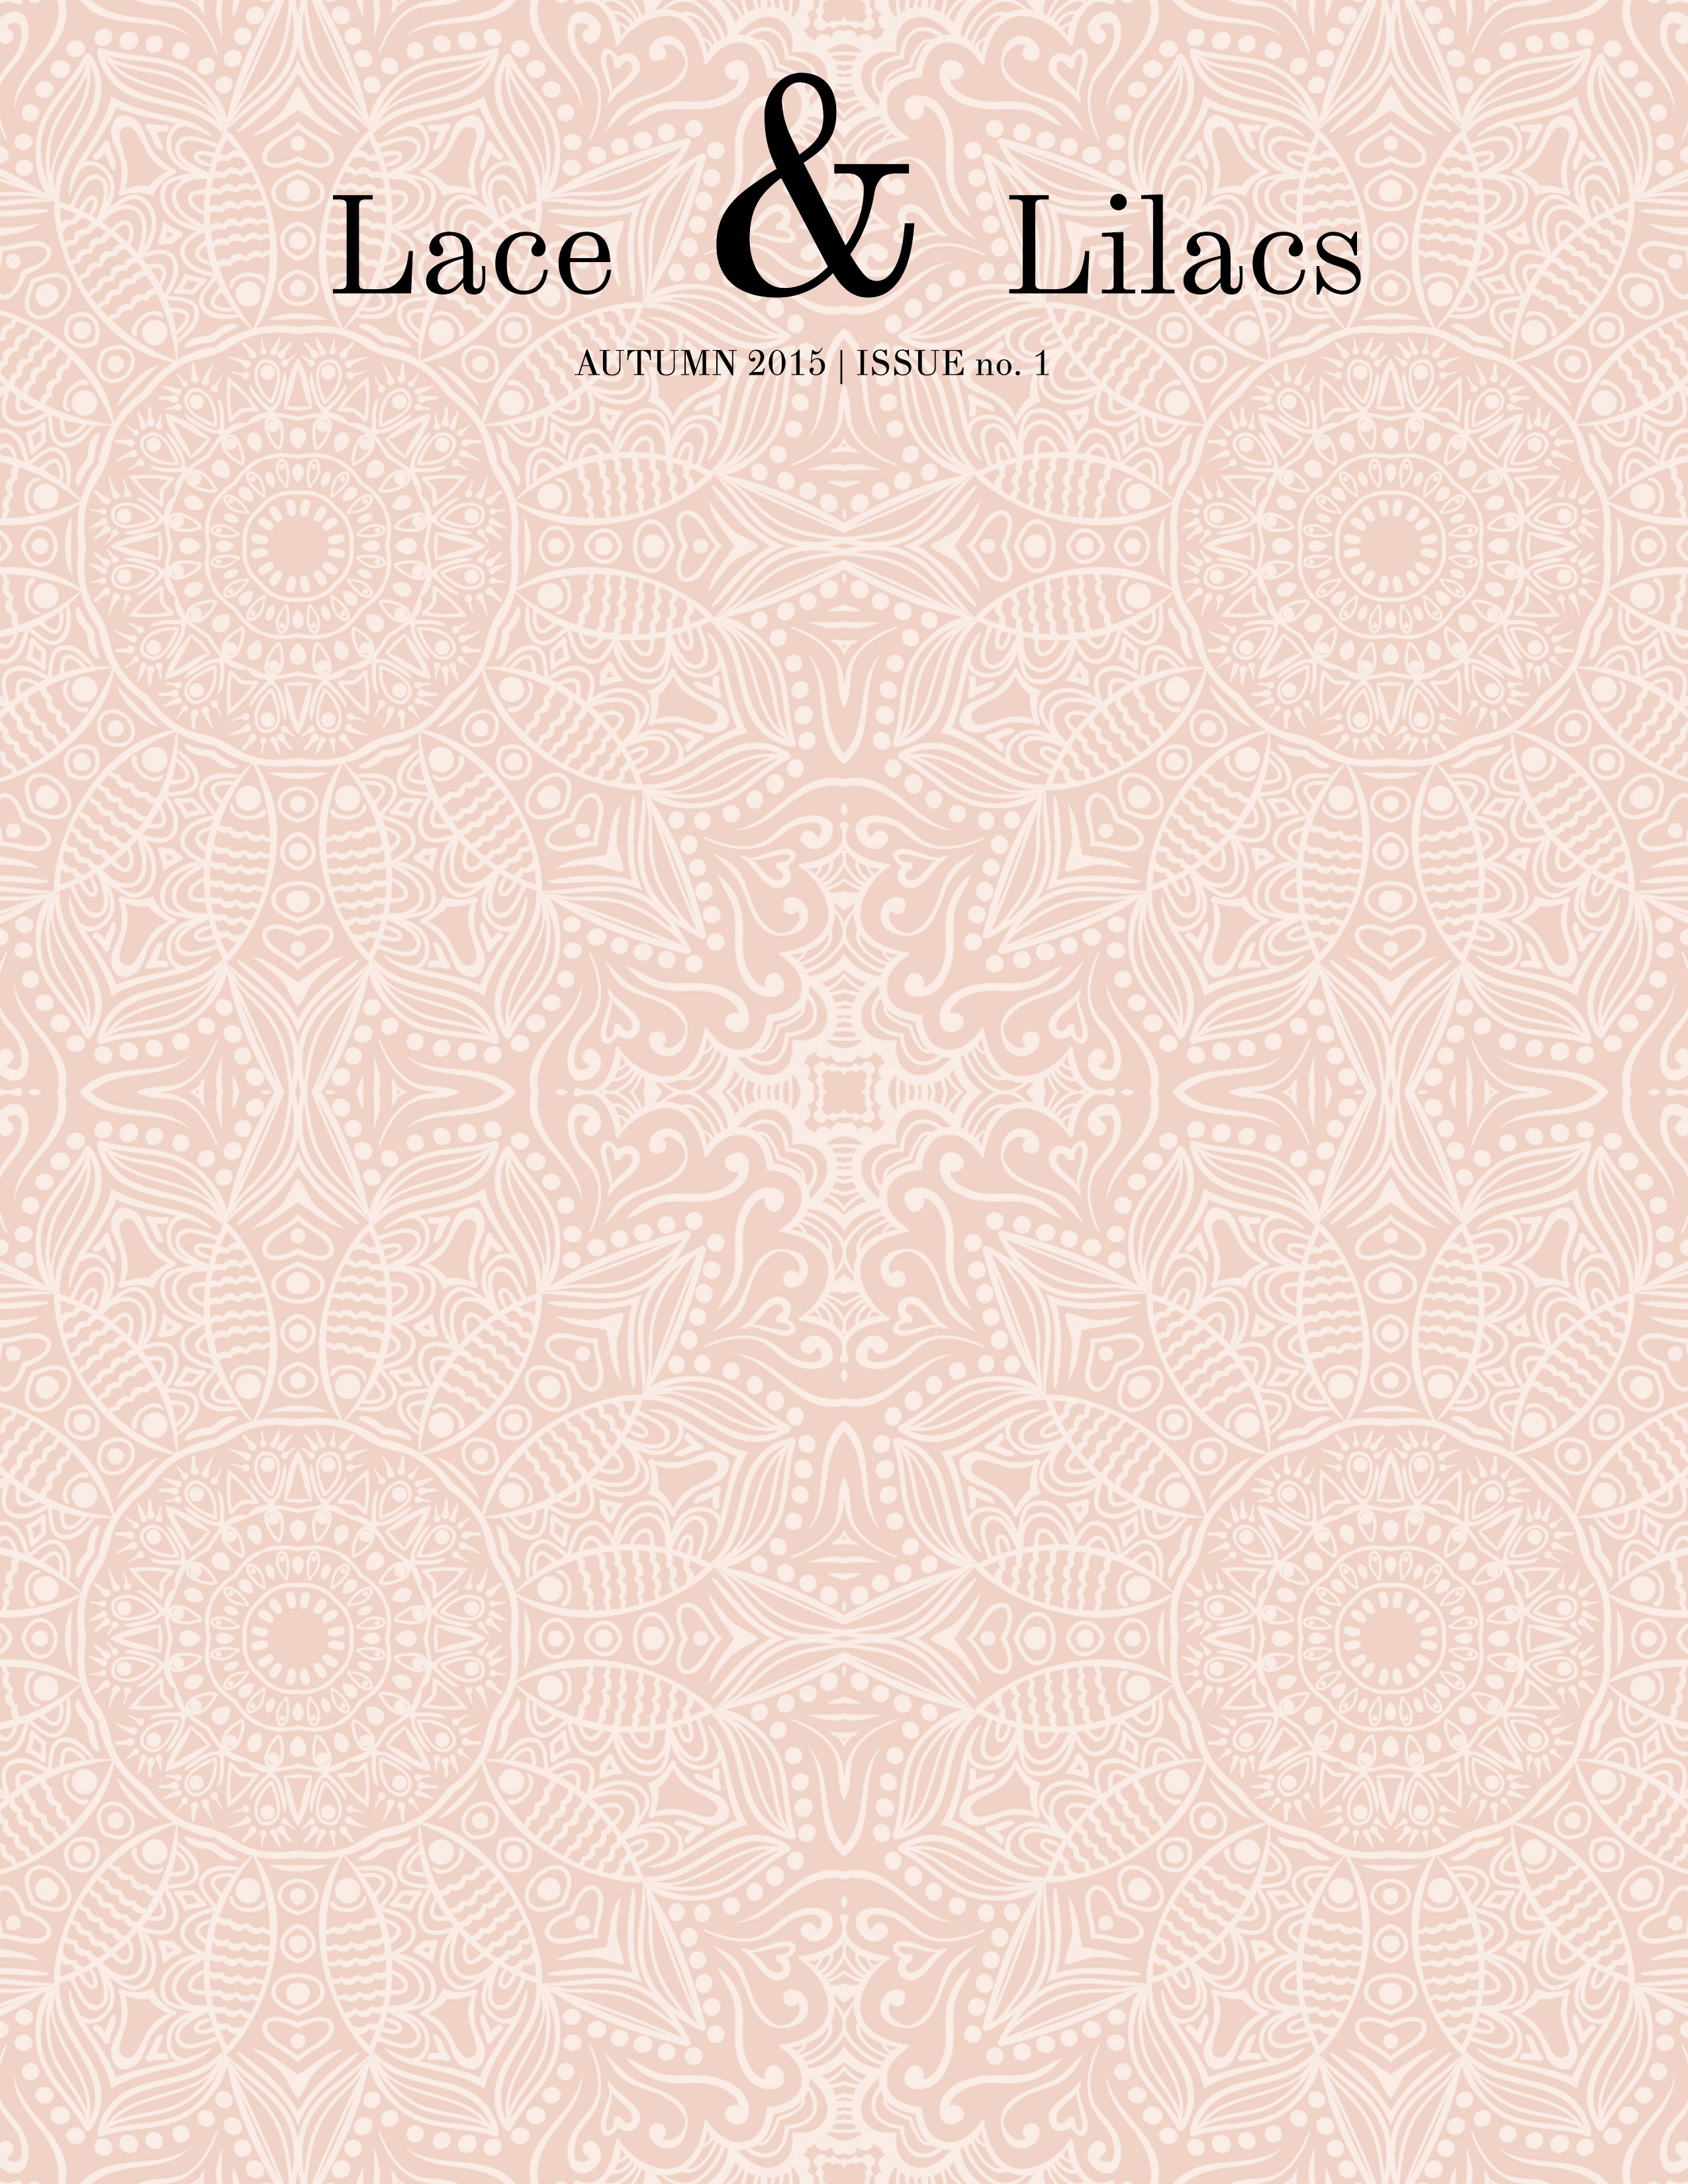 The Lace & Lilacs Magazine (Issue #1) - Cover